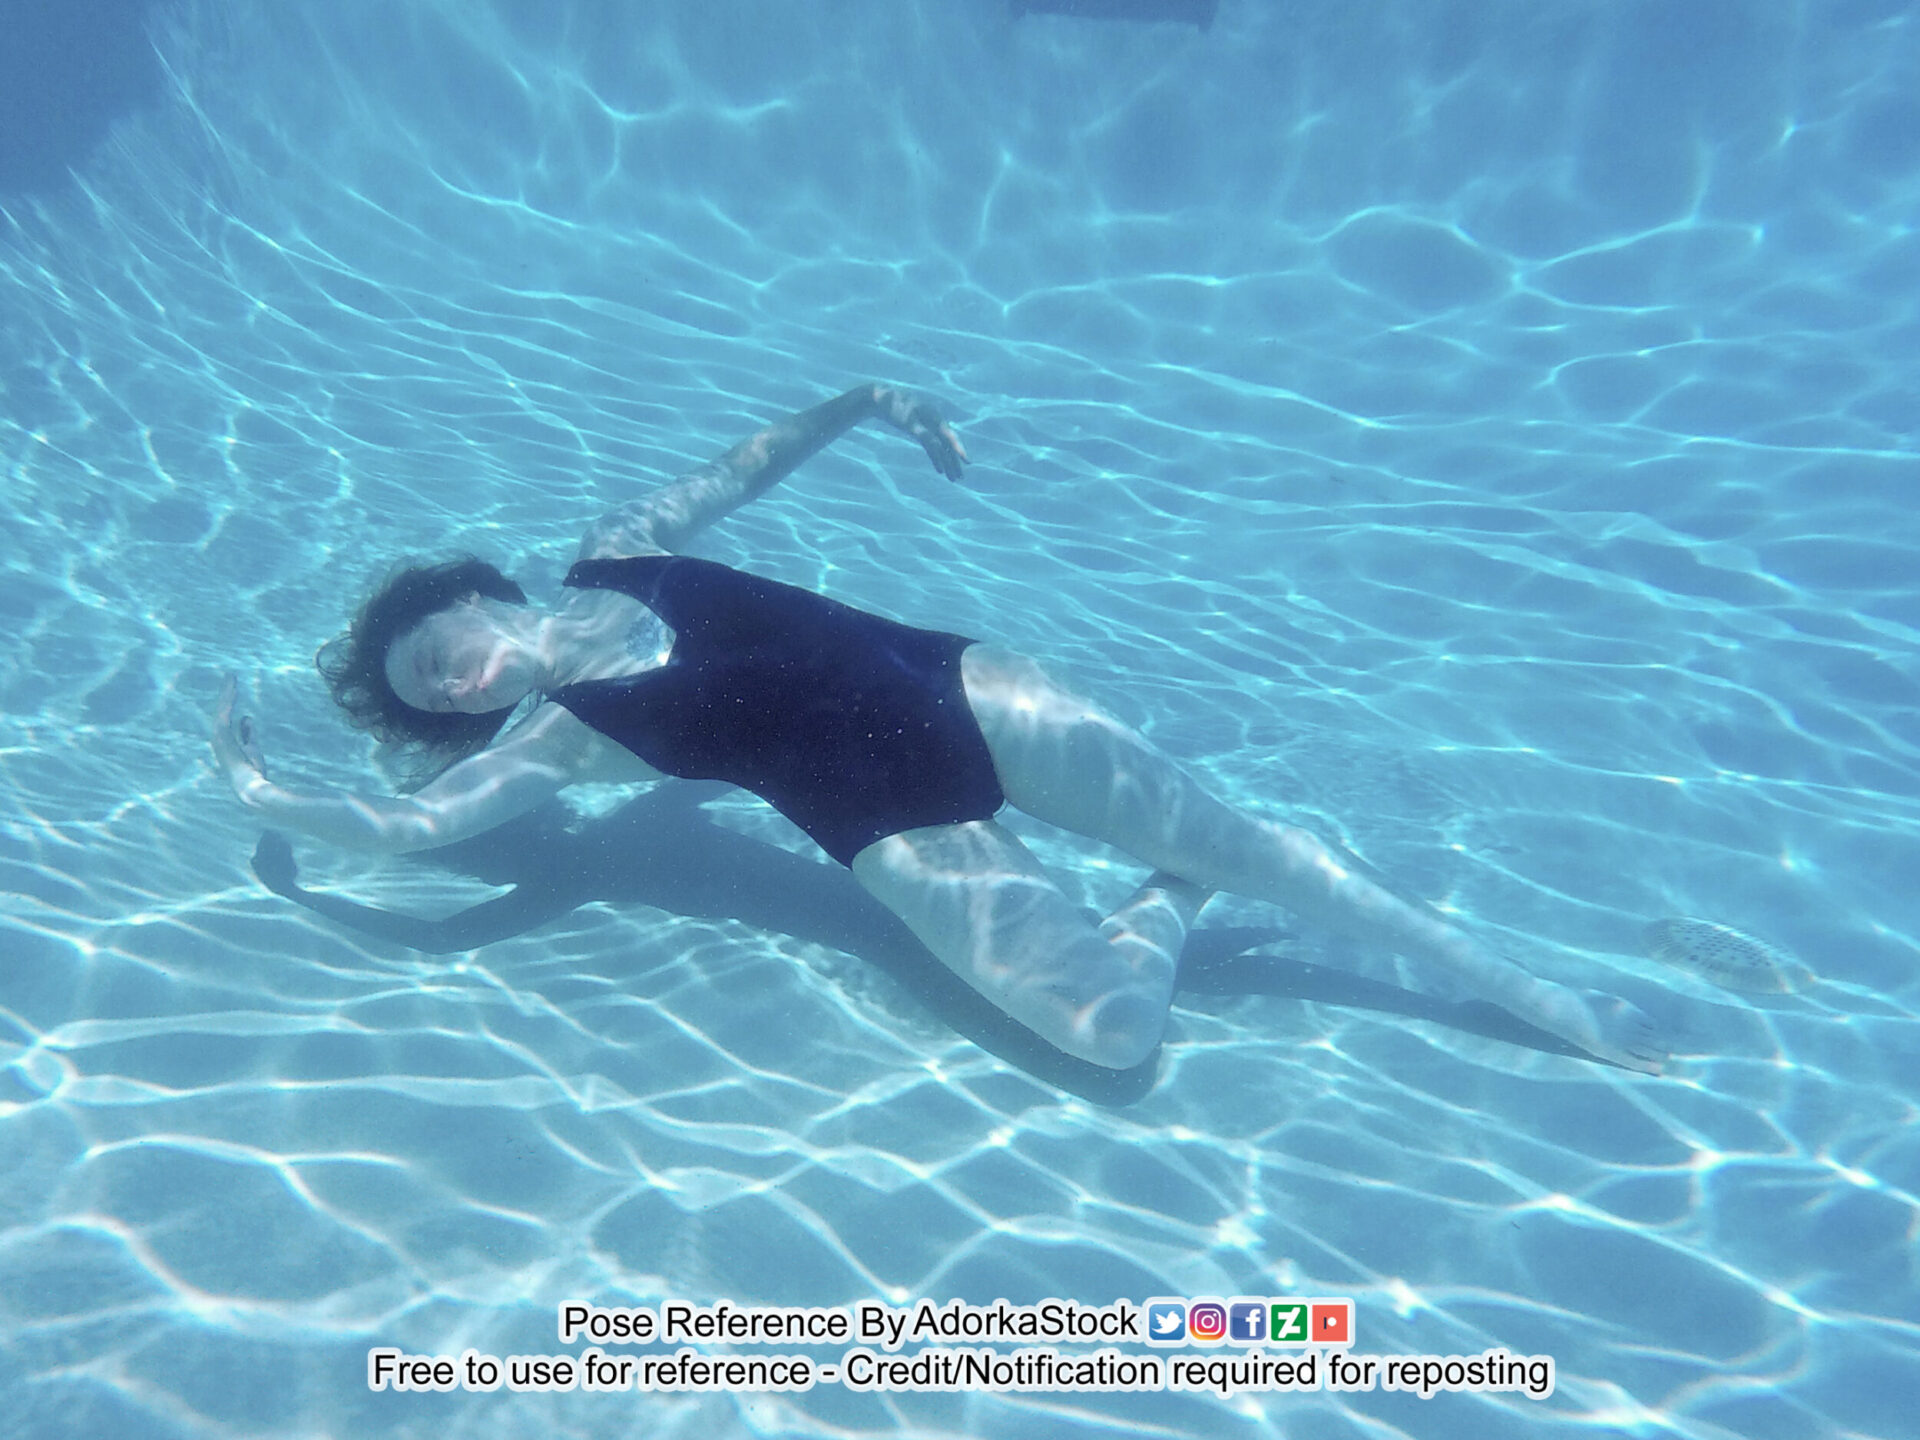 thin, white, female pose reference model in underwater floating pose with graceful limb gestures